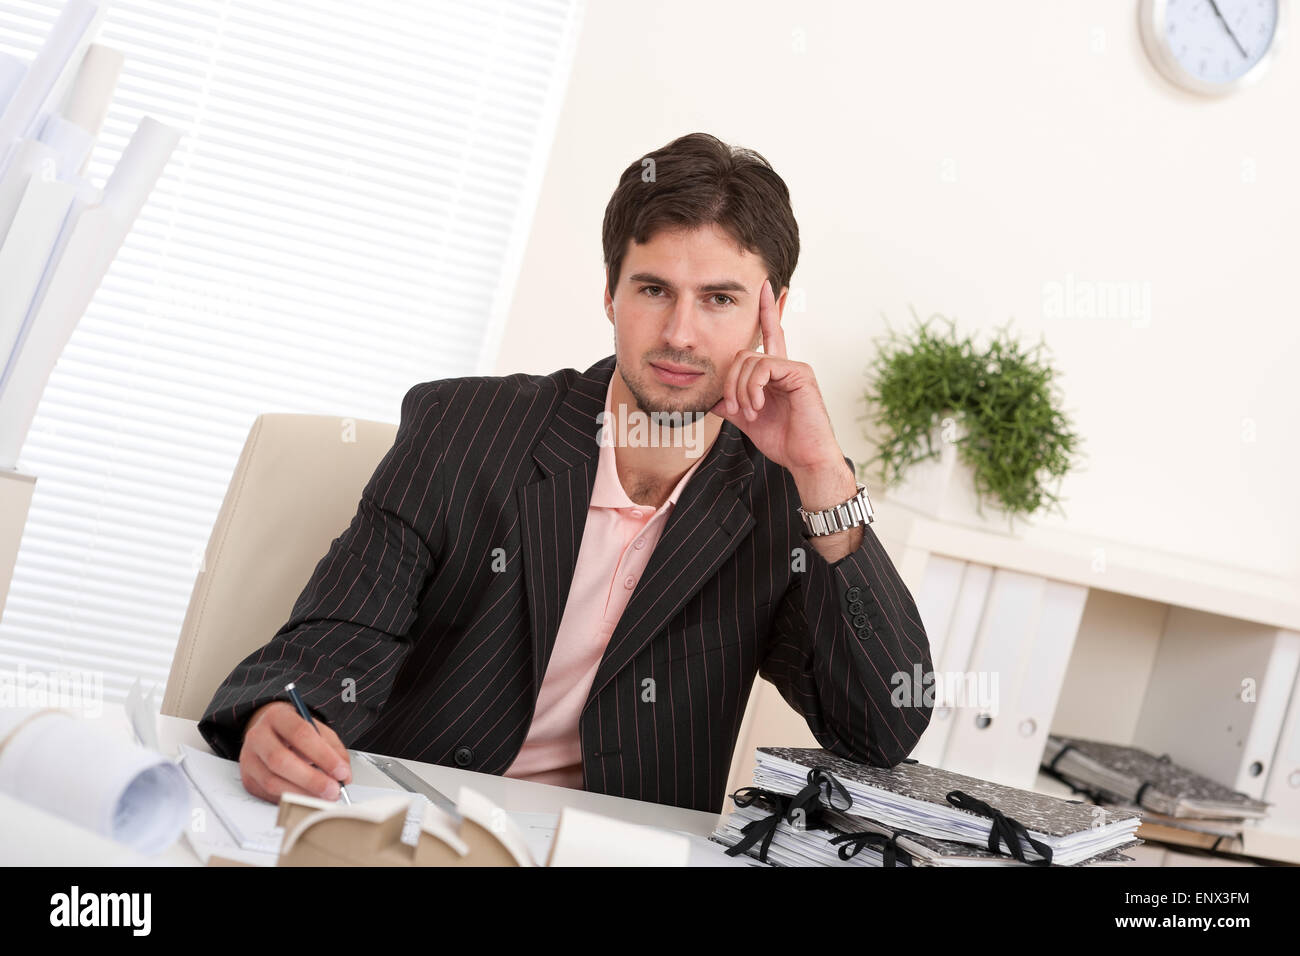 Successful professional businessman working at office Stock Photo